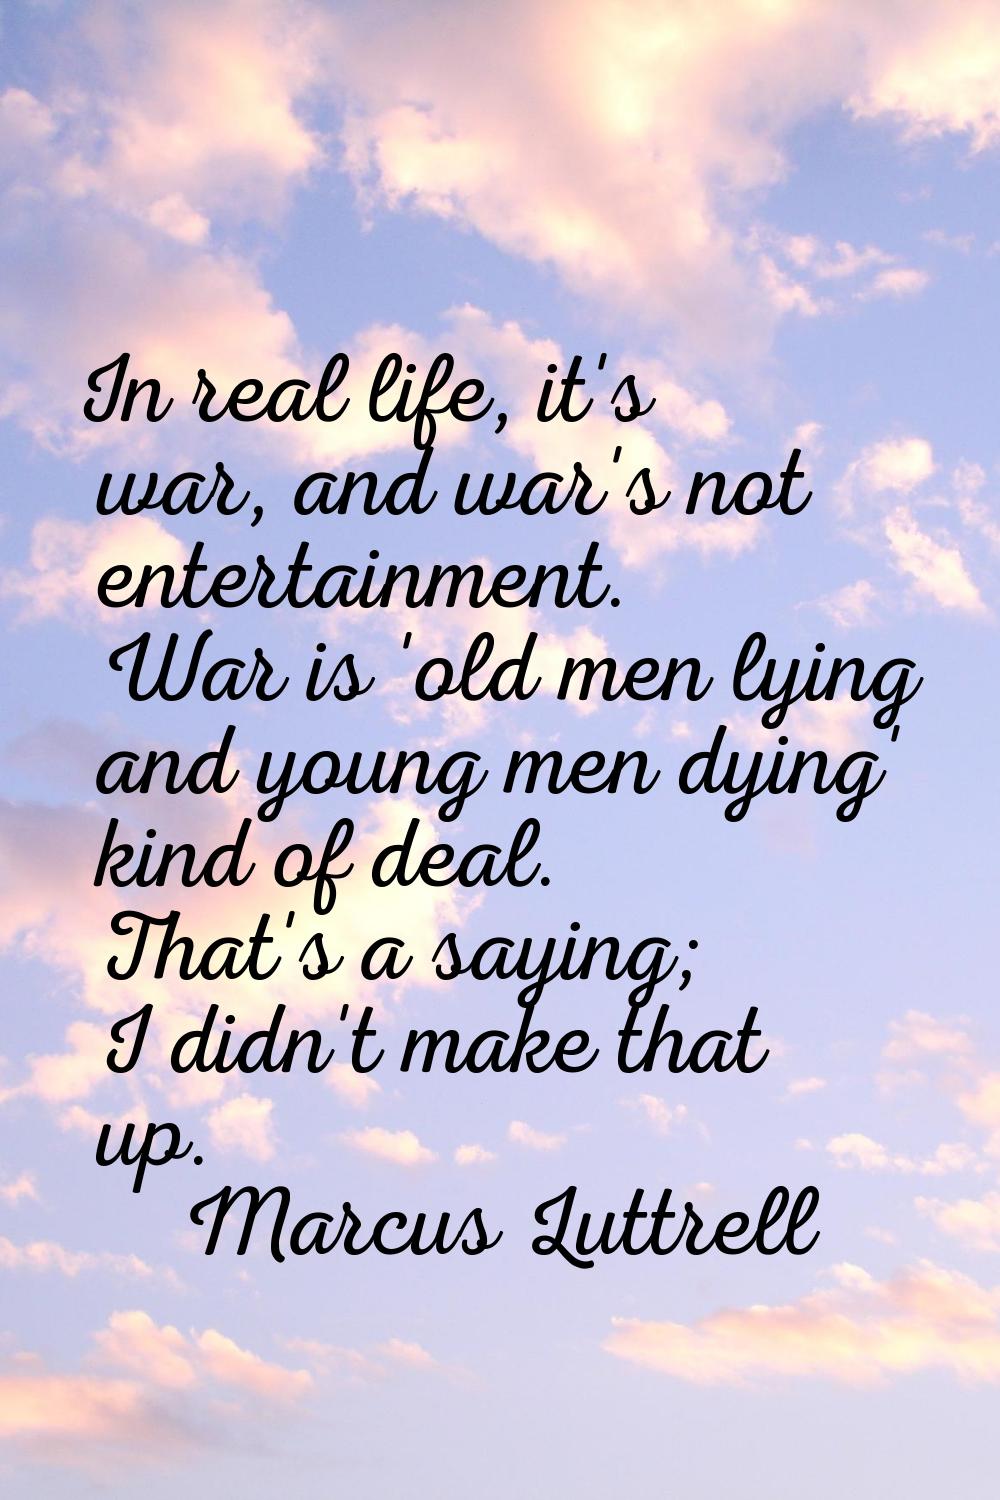 In real life, it's war, and war's not entertainment. War is 'old men lying and young men dying' kin